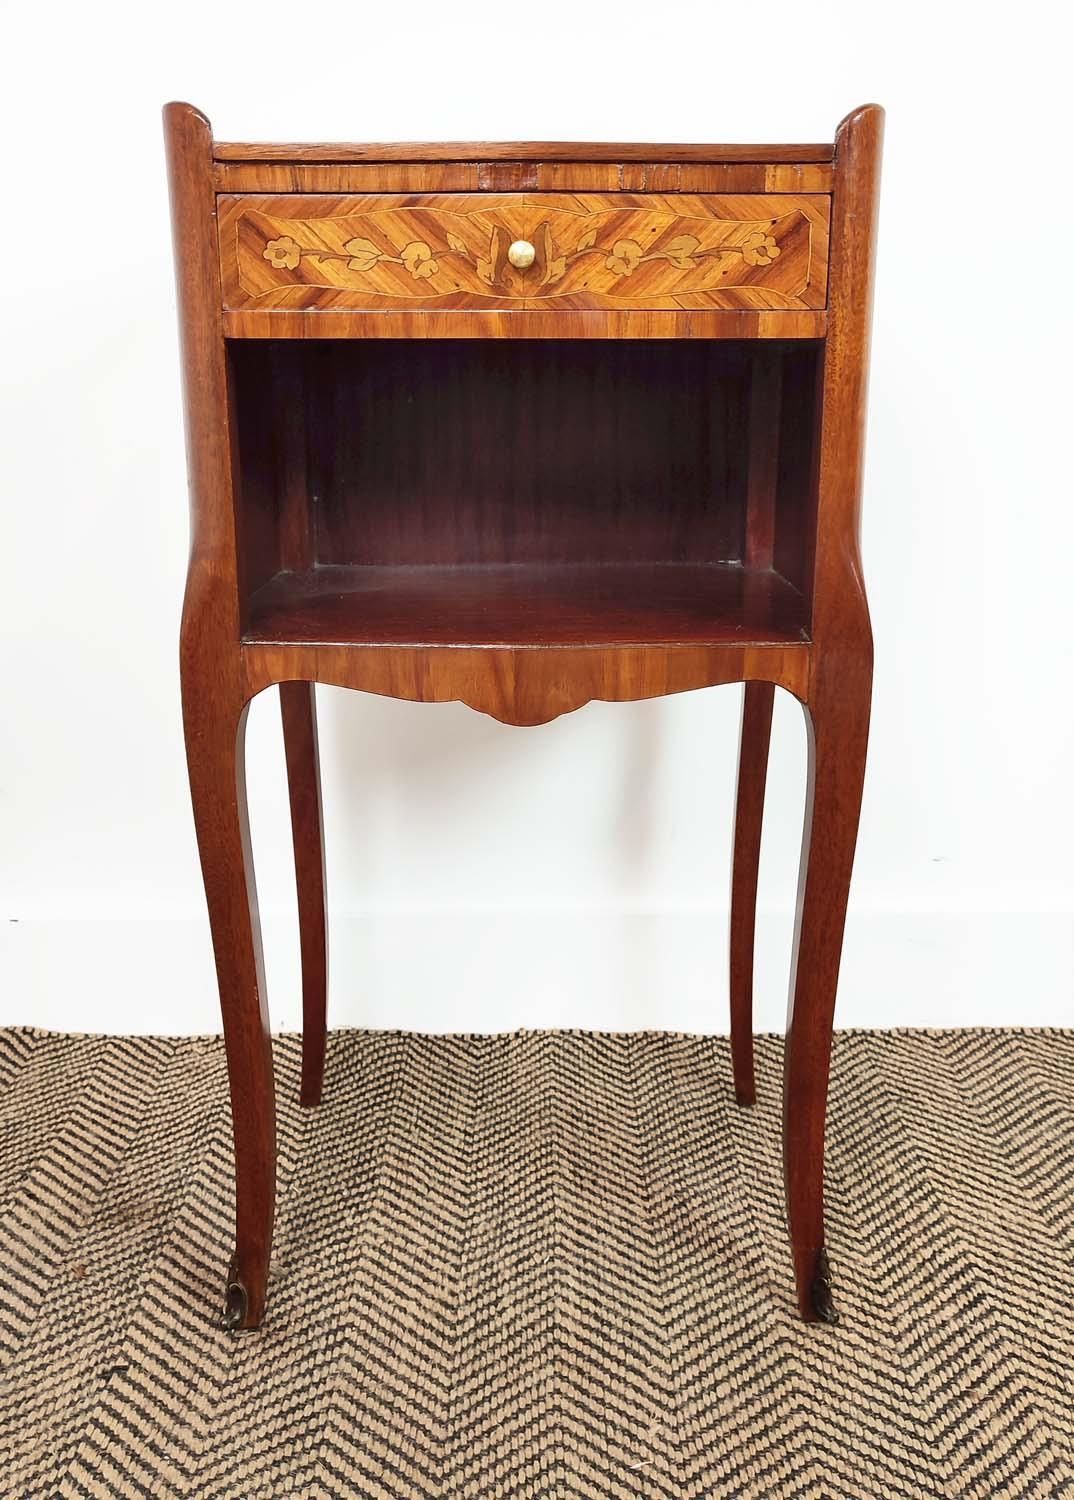 BEDSIDE CABINETS, a matched pair, Louis XV style tulipwood and inlaid, one with marquetry and - Image 6 of 10